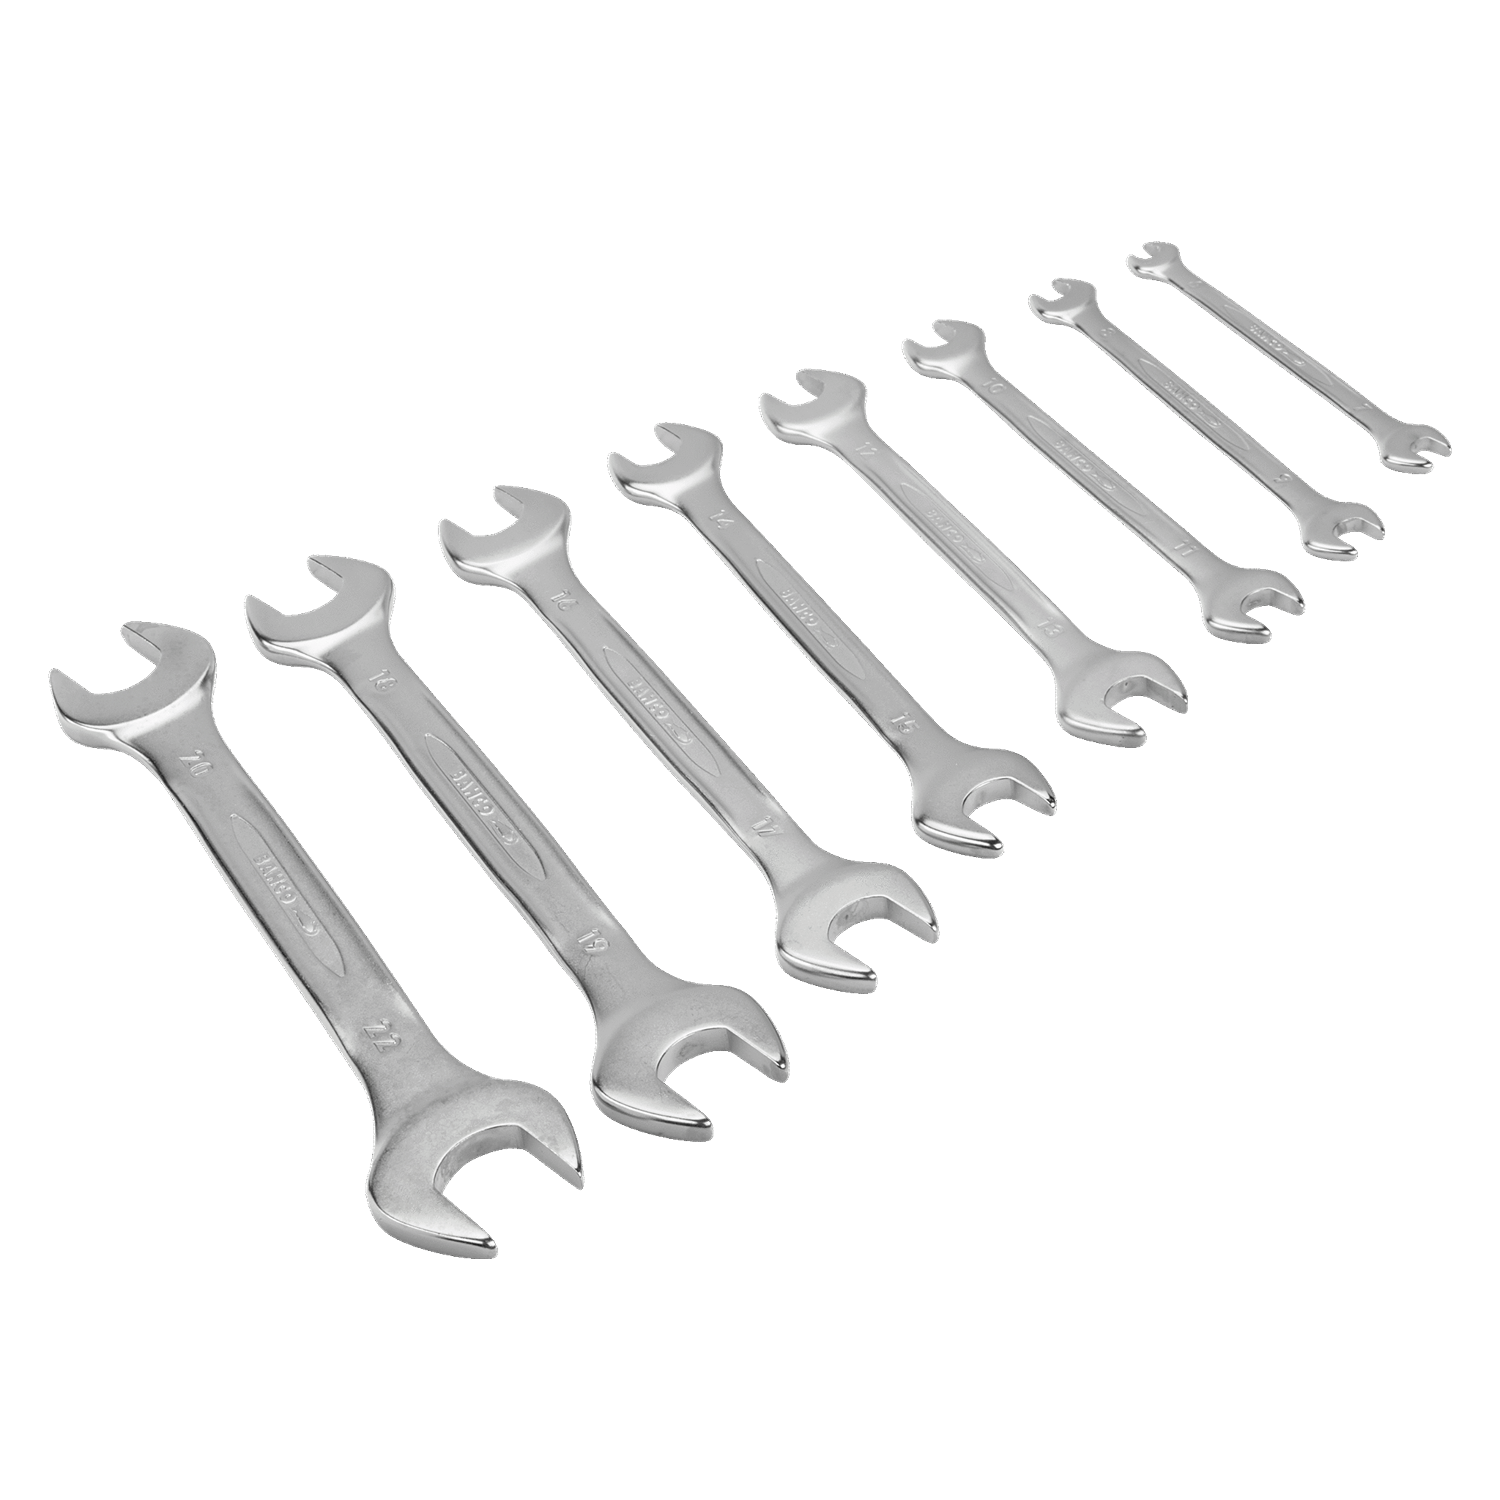 BAHCO 6M/S8 Metric Double Open Ended Wrench Set - 8 Pcs - Premium Double Open Ended Wrench Set from BAHCO - Shop now at Yew Aik.